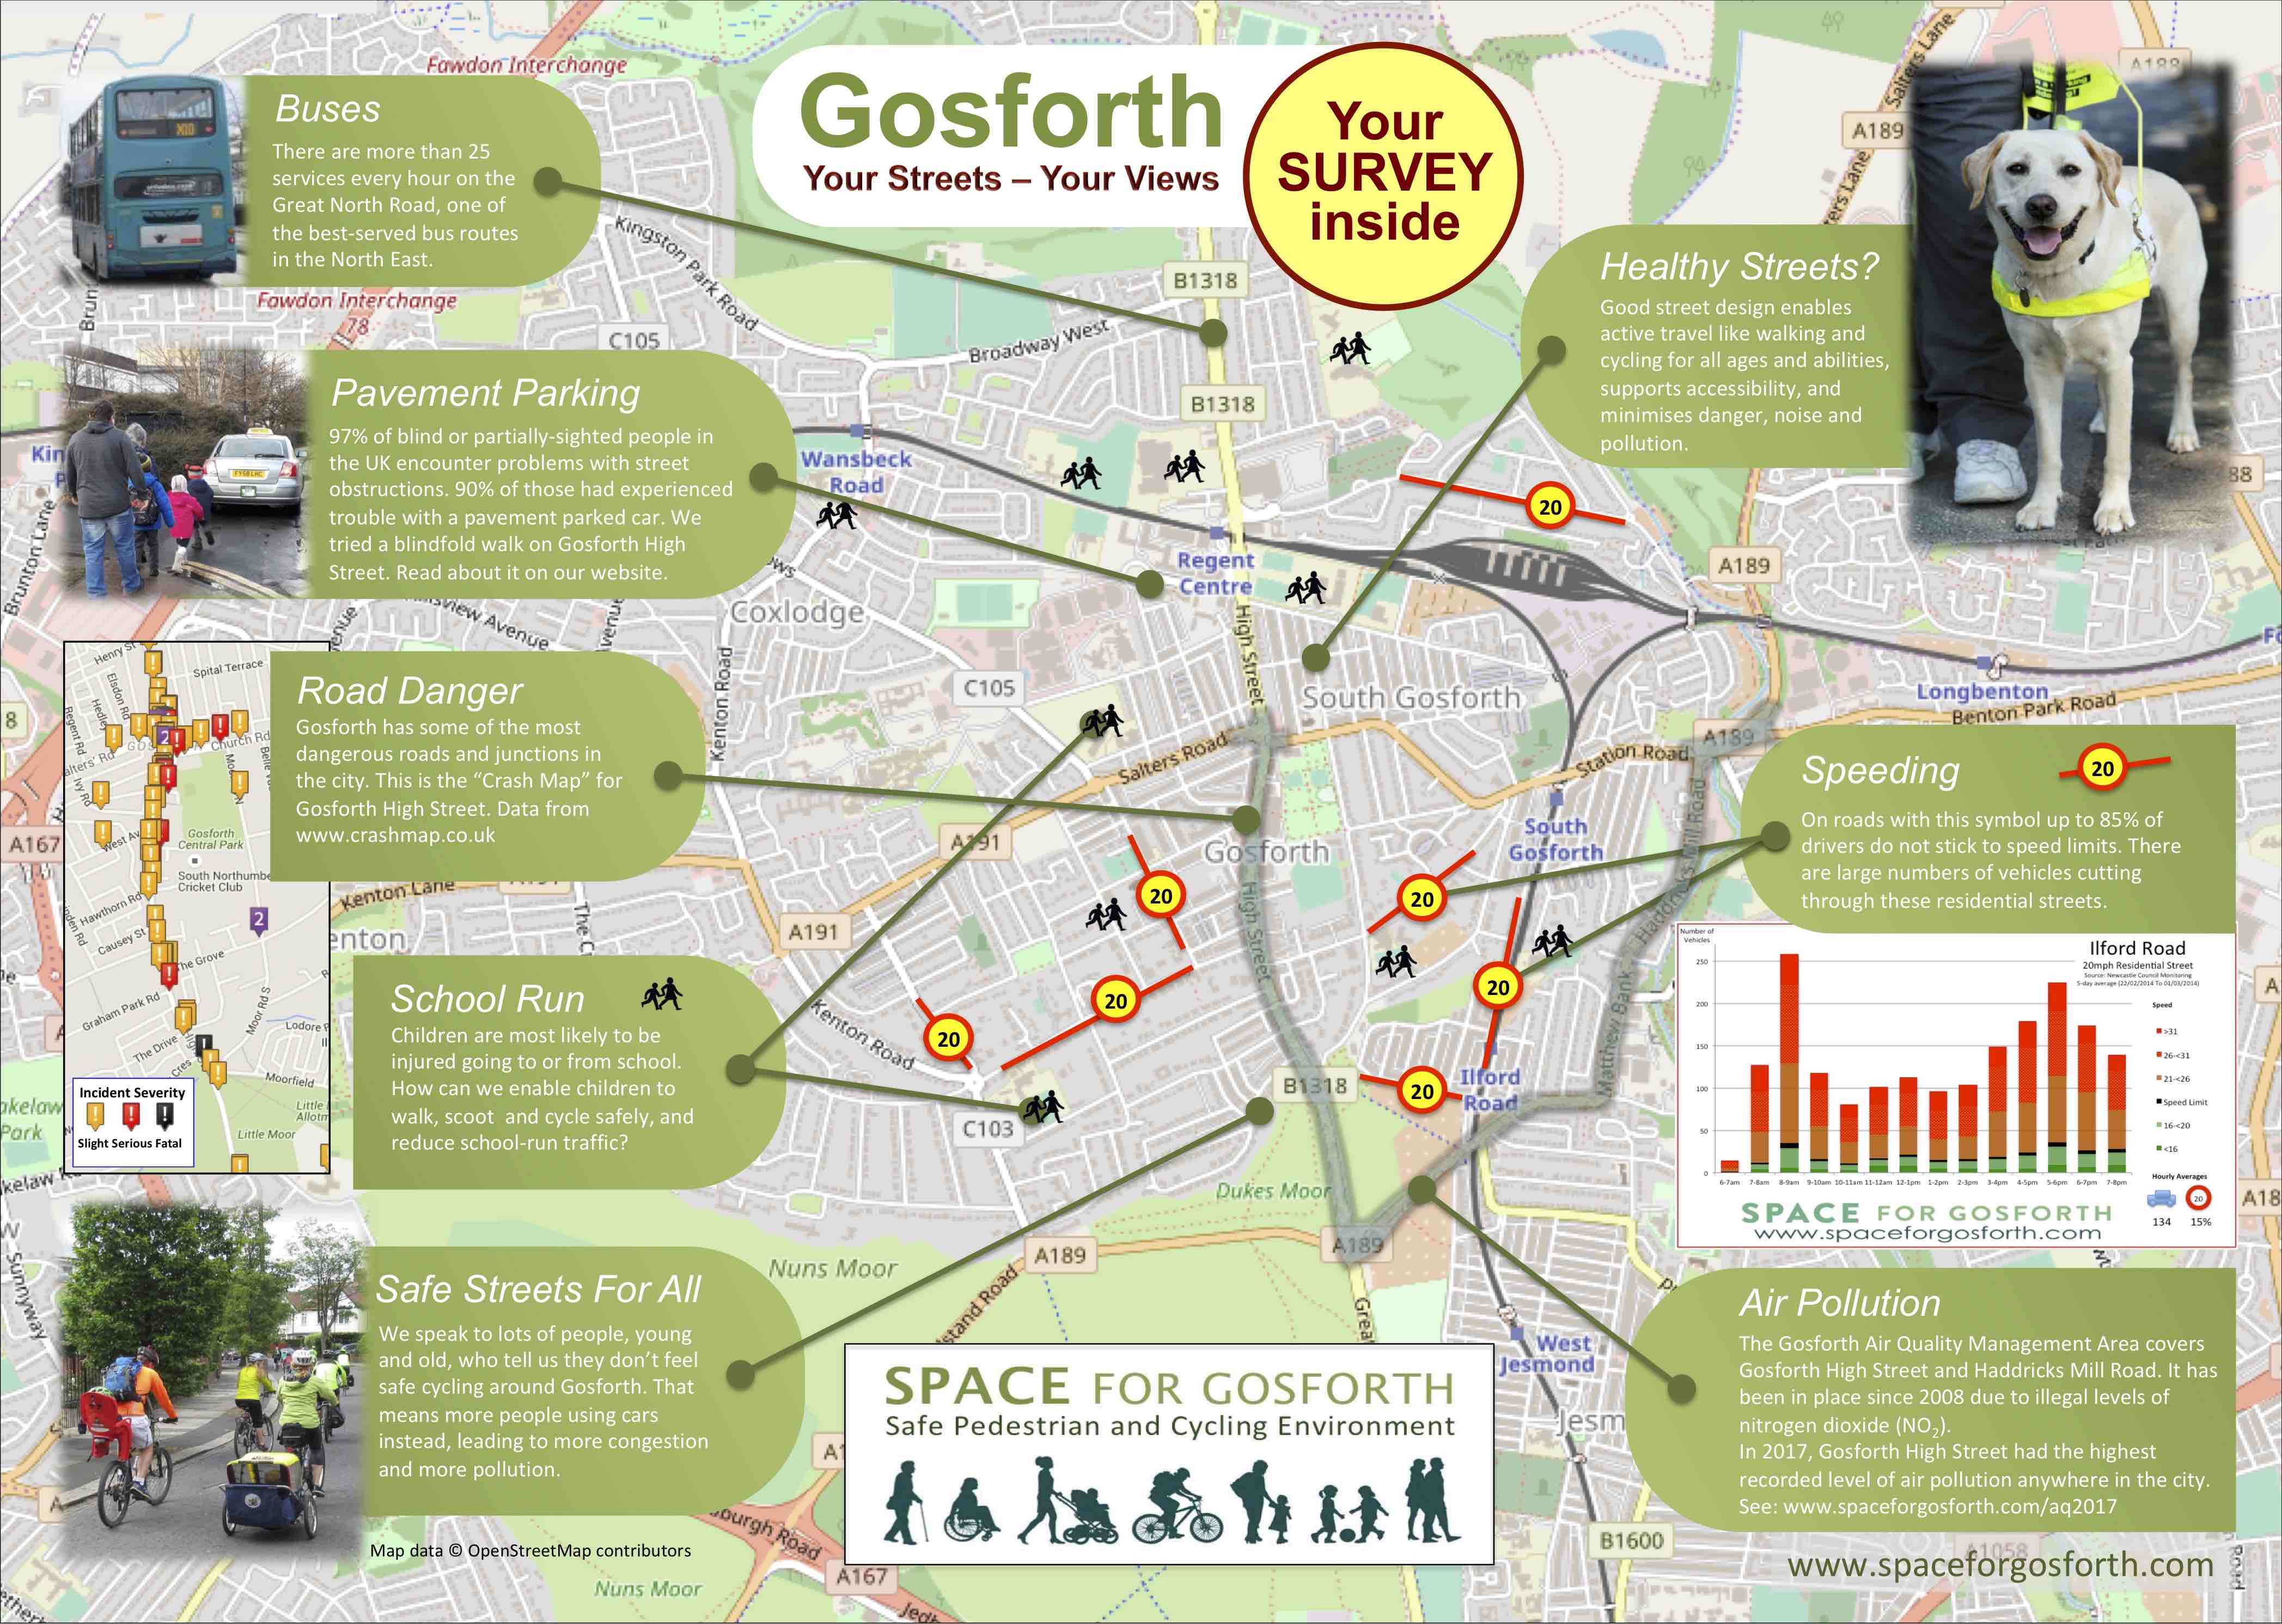 The SPACE for Gosforth survey leaflet front page.